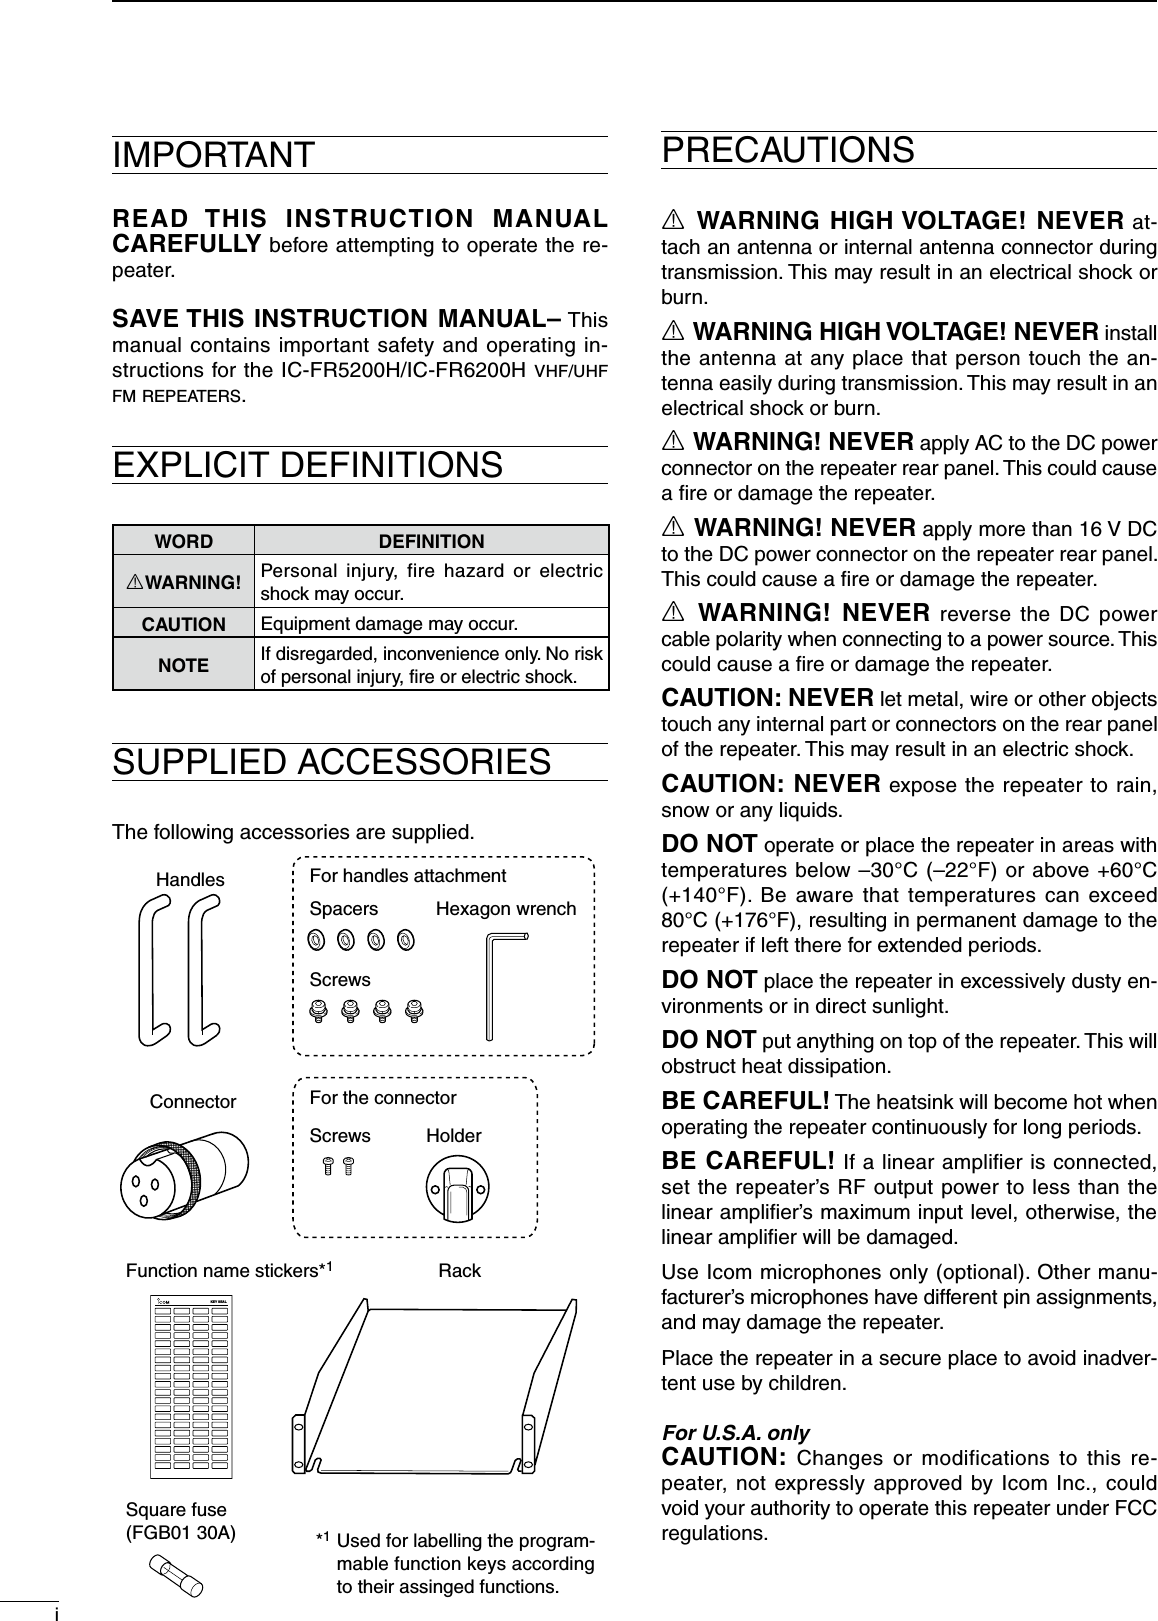 iIMPORTANTREAD  THIS  INSTRUCTION  MANUAL CAREFULLY before attempting to operate the re-peater.SAVE THIS INSTRUCTION MANUAL– This manual contains important safety and operating in-structions for the IC-FR5200H/IC-FR6200H vhf/uhf f m  r e p e at e r s .EXPLICIT DEFINITIONSWORD DEFINITIONRWARNING! Personal  injury,  fire  hazard  or  electric shock may occur.CAUTION Equipment damage may occur.NOTEIf disregarded, inconvenience only. No risk of personal injury, ﬁre or electric shock.SUPPLIED ACCESSORIESThe following accessories are supplied.R WARNING HIGH VOLTAGE! NEVER at-tach an antenna or internal antenna connector during transmission. This may result in an electrical shock or burn.R WARNING HIGH VOLTAGE! NEVER install the antenna at any place that person touch the an-tenna easily during transmission. This may result in an electrical shock or burn.R WARNING! NEVER apply AC to the DC power connector on the repeater rear panel. This could cause a ﬁre or damage the repeater.R WARNING! NEVER apply more than 16 V DC to the DC power connector on the repeater rear panel. This could cause a ﬁre or damage the repeater.R WARNING!  NEVER  reverse the DC  power cable polarity when connecting to a power source. This could cause a ﬁre or damage the repeater.CAUTION: NEVER let metal, wire or other objects touch any internal part or connectors on the rear panel of the repeater. This may result in an electric shock.CAUTION: NEVER expose the repeater to rain, snow or any liquids.DO NOT operate or place the repeater in areas with temperatures below –30°C (–22°F) or above +60°C (+140°F).  Be  aware that  temperatures  can  exceed 80°C (+176°F), resulting in permanent damage to the repeater if left there for extended periods.DO NOT place the repeater in excessively dusty en-vironments or in direct sunlight.DO NOT put anything on top of the repeater. This will obstruct heat dissipation.BE CAREFUL! The heatsink will become hot when operating the repeater continuously for long periods.BE CAREFUL! If a linear ampliﬁer is connected, set the repeater’s RF output power to less than the linear ampliﬁer’s maximum input level, otherwise, the linear ampliﬁer will be damaged.Use Icom microphones only (optional). Other manu-facturer’s microphones have different pin assignments, and may damage the repeater.Place the repeater in a secure place to avoid inadver-tent use by children.For U.S.A. onlyCAUTION:  Changes  or  modifications  to  this  re-peater, not expressly approved by Icom Inc., could void your authority to operate this repeater under FCC regulations.PRECAUTIONSHandles For handles attachmentFor the connectorSpacers Hexagon wrenchScrewsScrews HolderConnectorFunction name stickers*1Rack KEY SEALUsed for labelling the program-mable function keys according to their assinged functions.*1Square fuse (FGB01 30A)